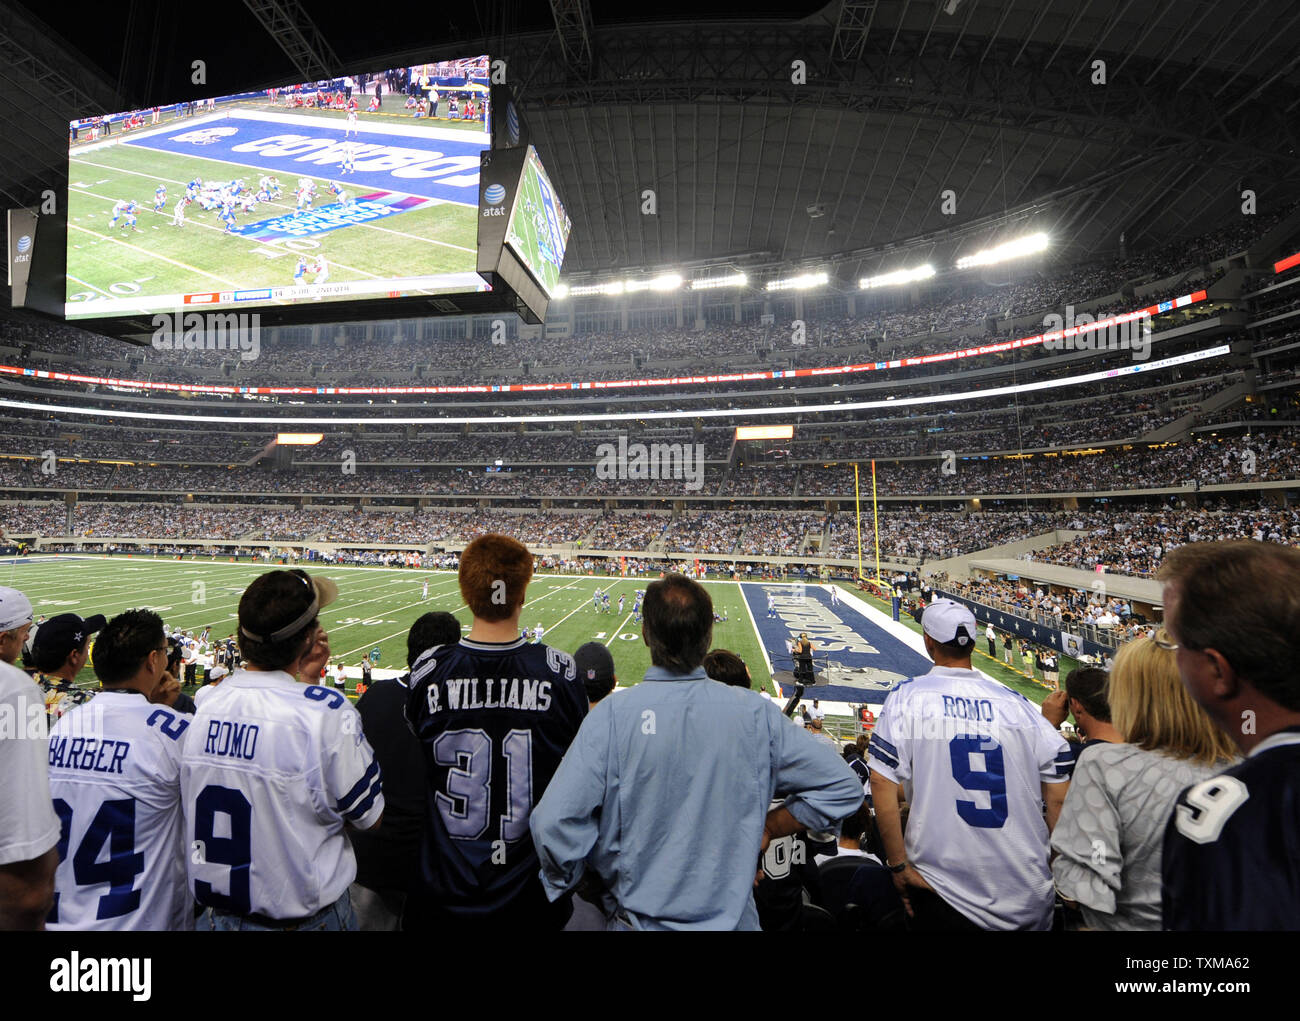 Fans watch the Dallas Cowboys battle the New York Giants on the stadium's giant video scoreboard September 21, 2009 in Arlington, Texas.   More than 100,000 fans filled the new $1.2 billion stadium for the first NFL game.   UPI/Ian Halperin Stock Photo